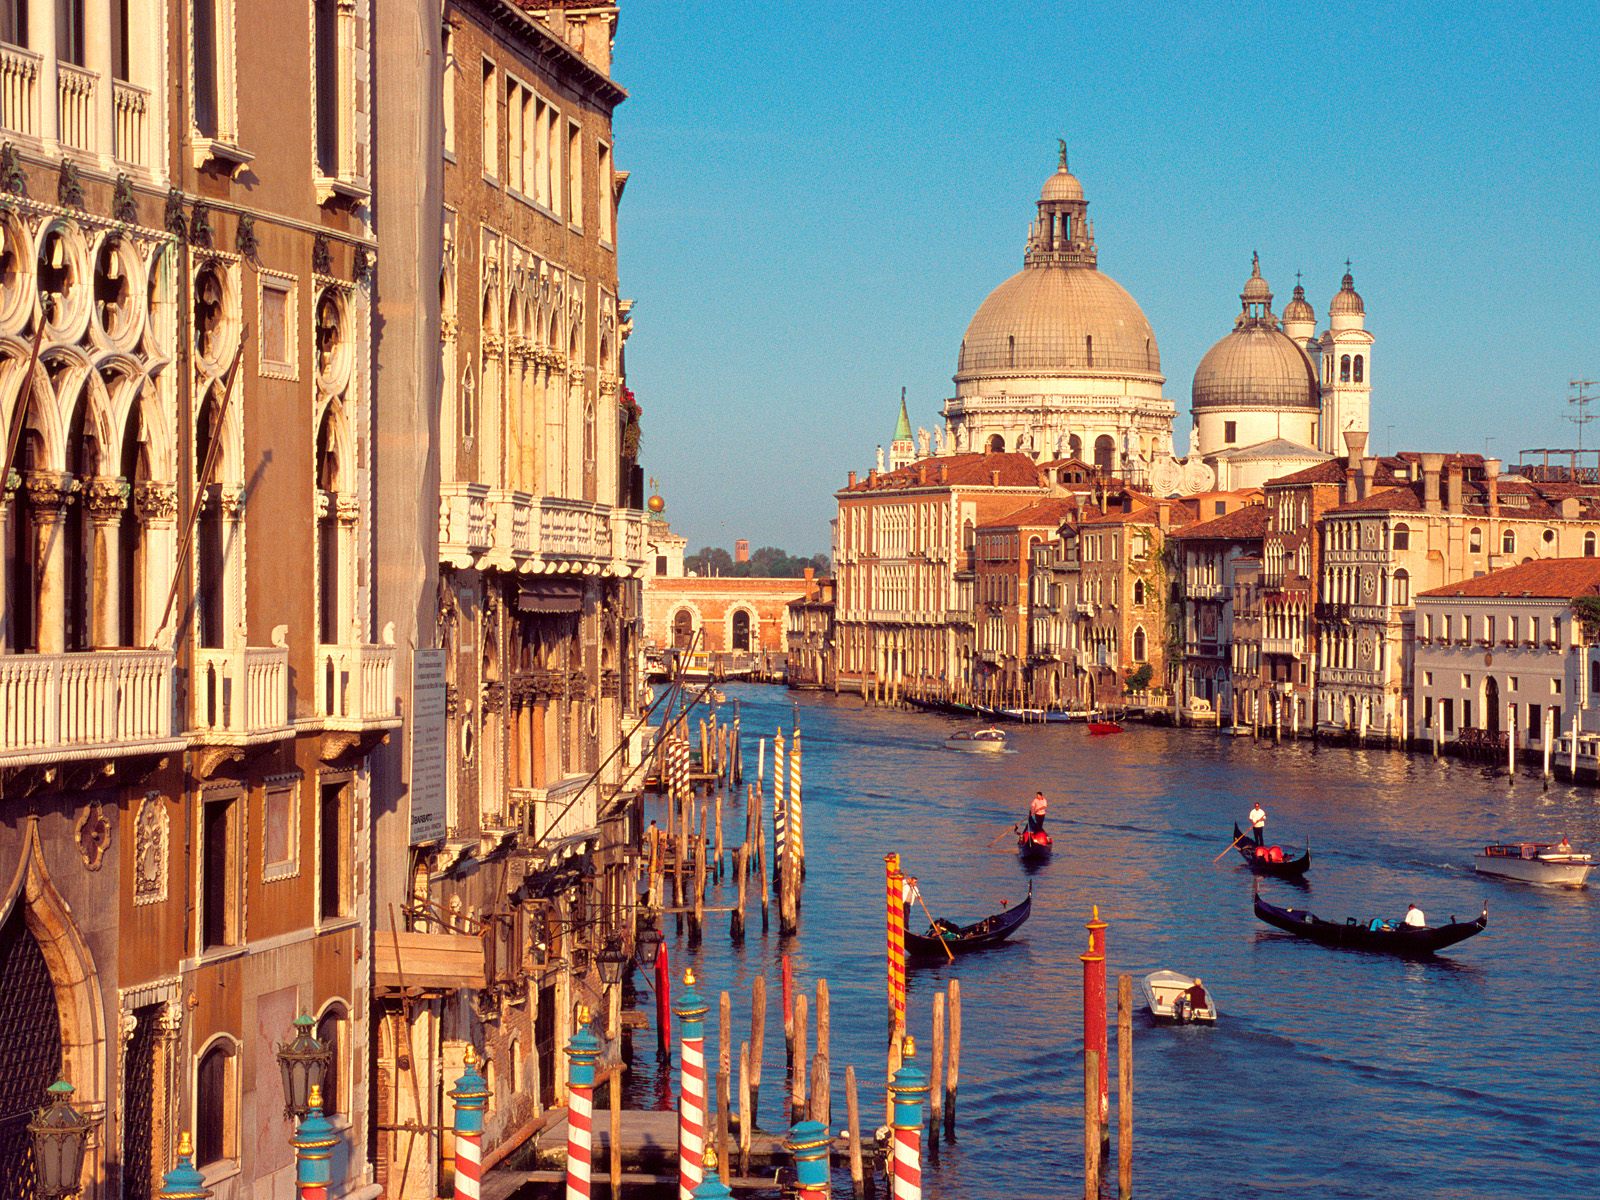 Can You Actually Get at Least 15/20 on This Quiz That’s All About Europe? Venice, Italy